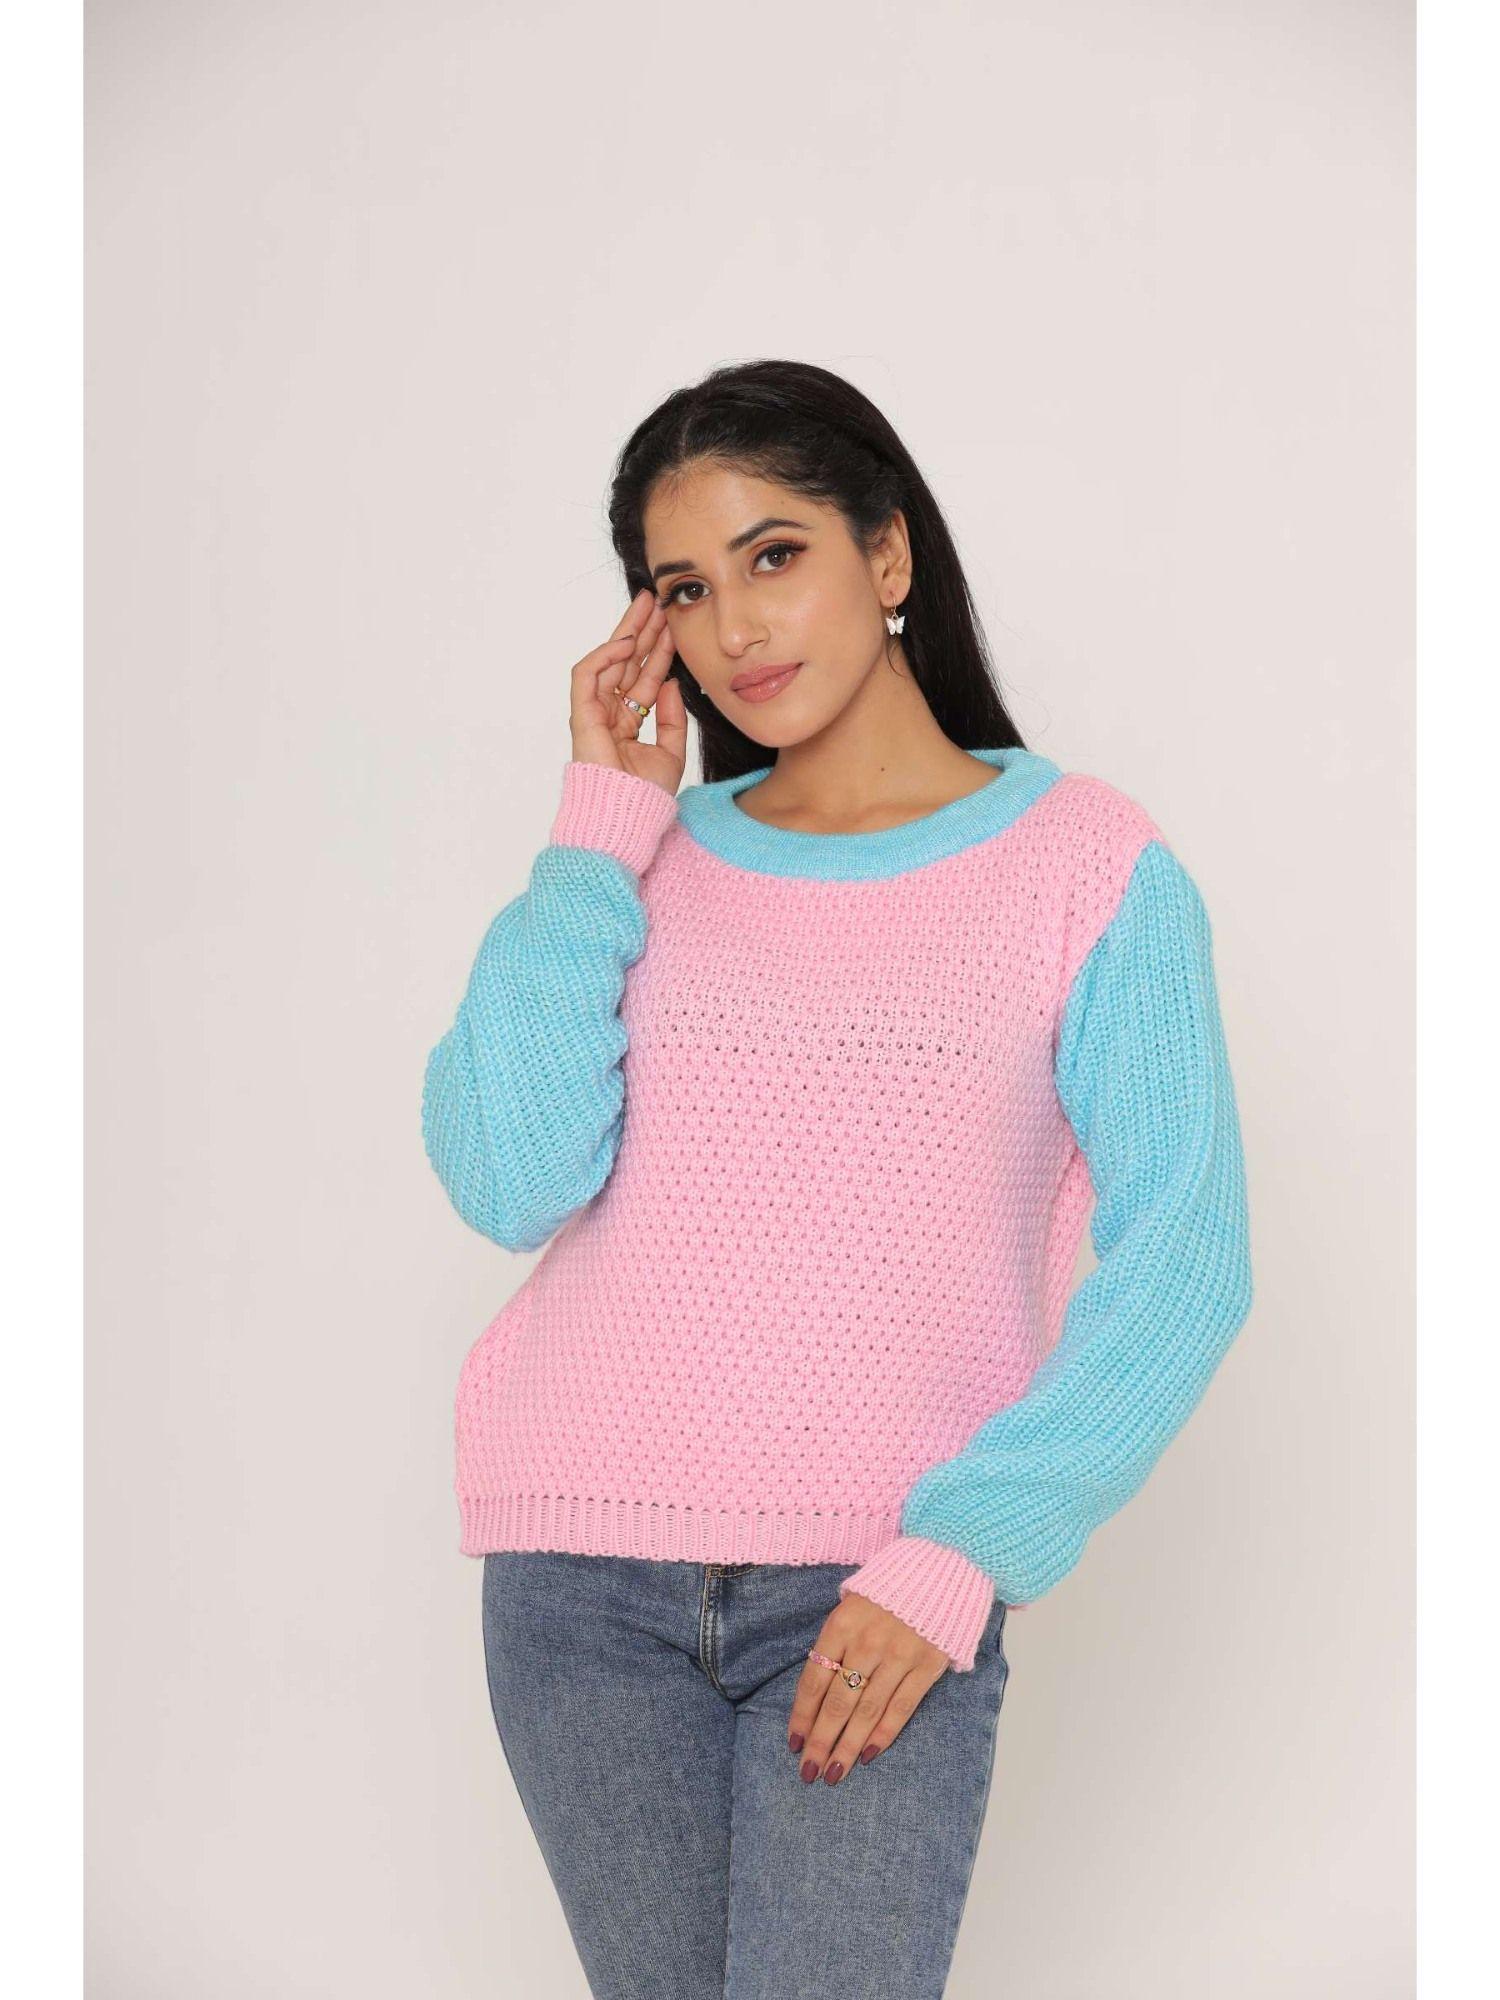 stylish-oversized-drop-shoulders-pink-and-blue-woollen-sweaters-for-women